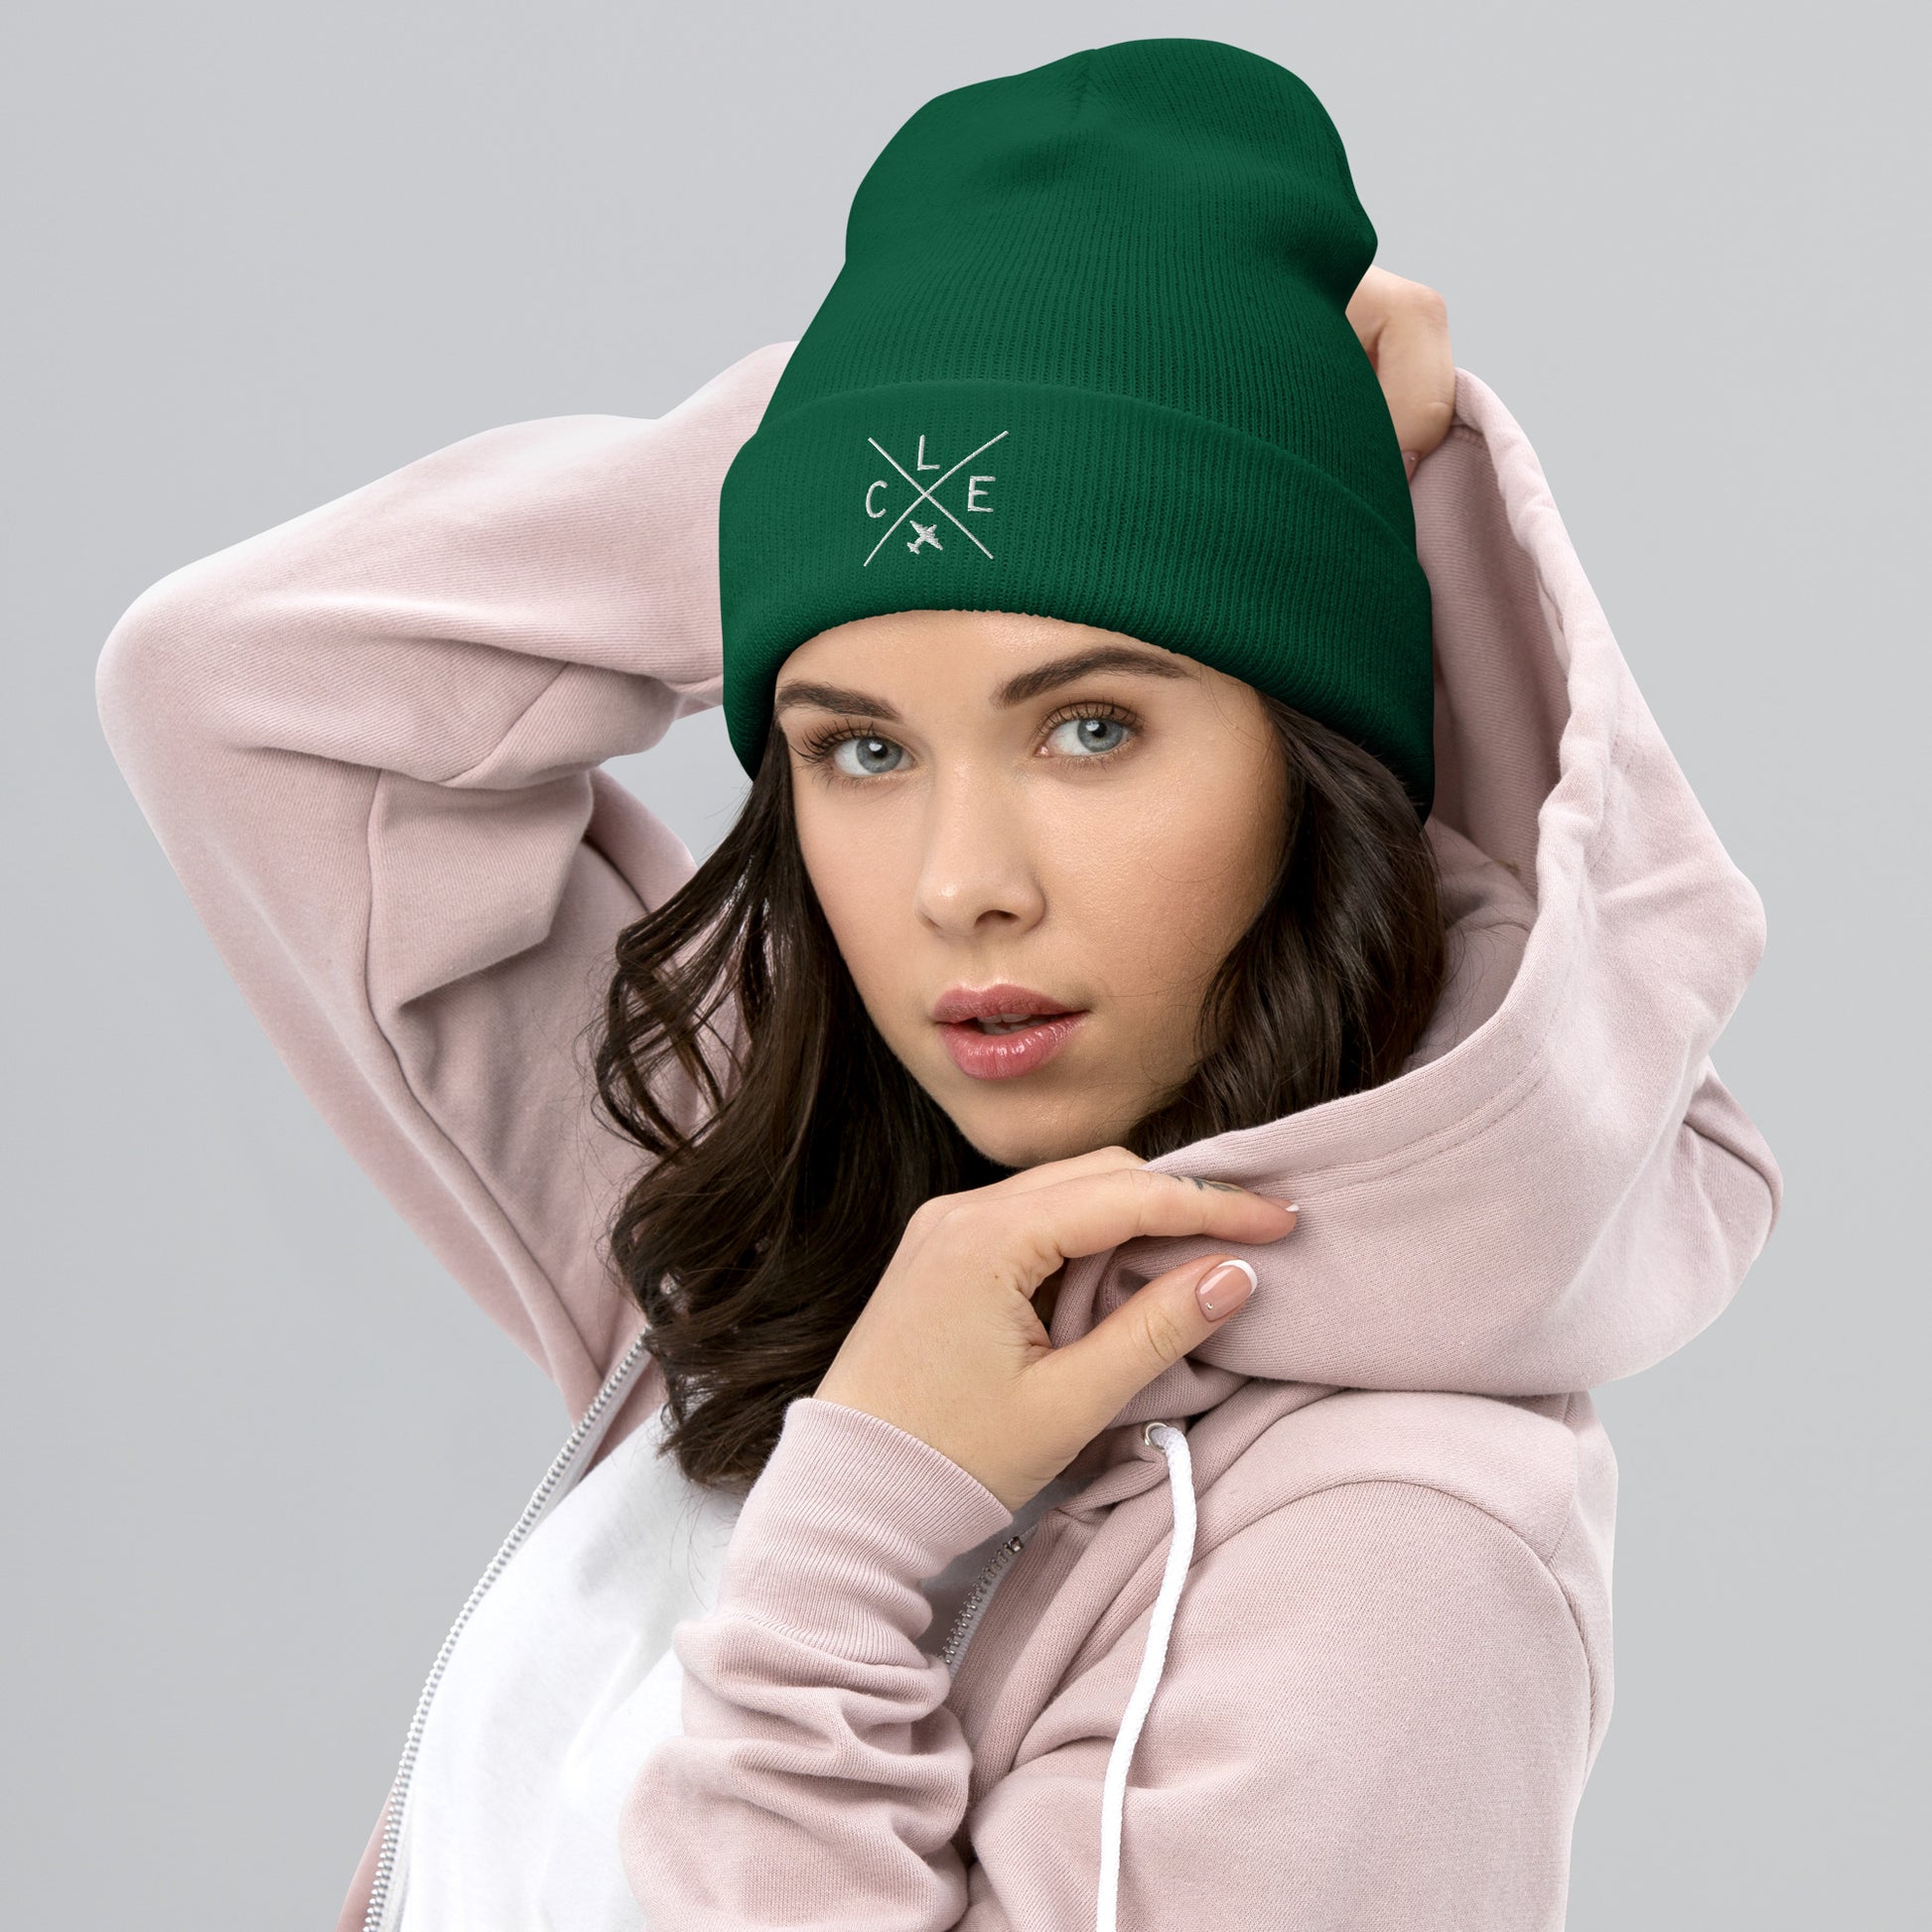 Crossed-X Cuffed Beanie - White • CLE Cleveland • YHM Designs - Image 05